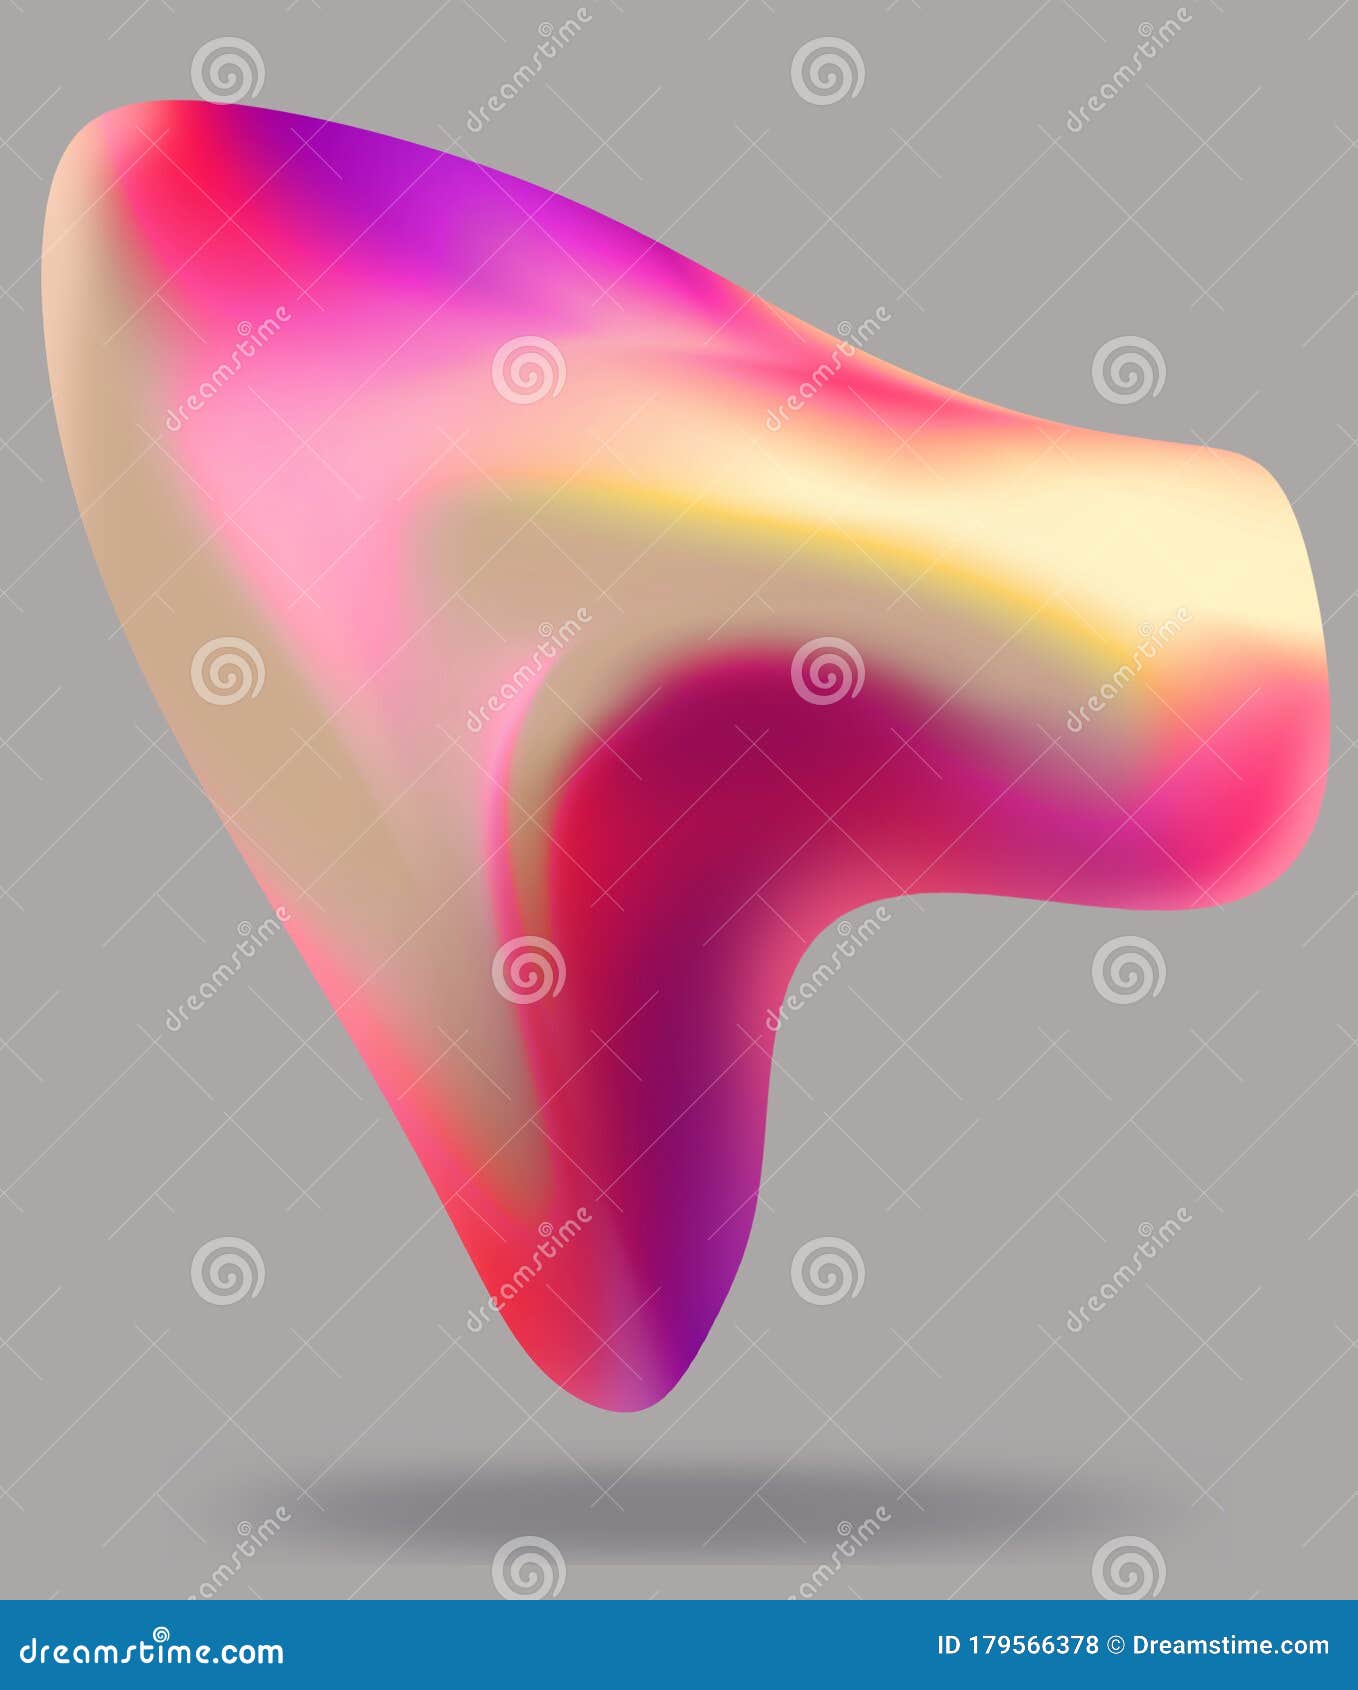 abstract minimal gradient  for branding, advertising in colorful smooth  blob style. modern trendy background cover pos